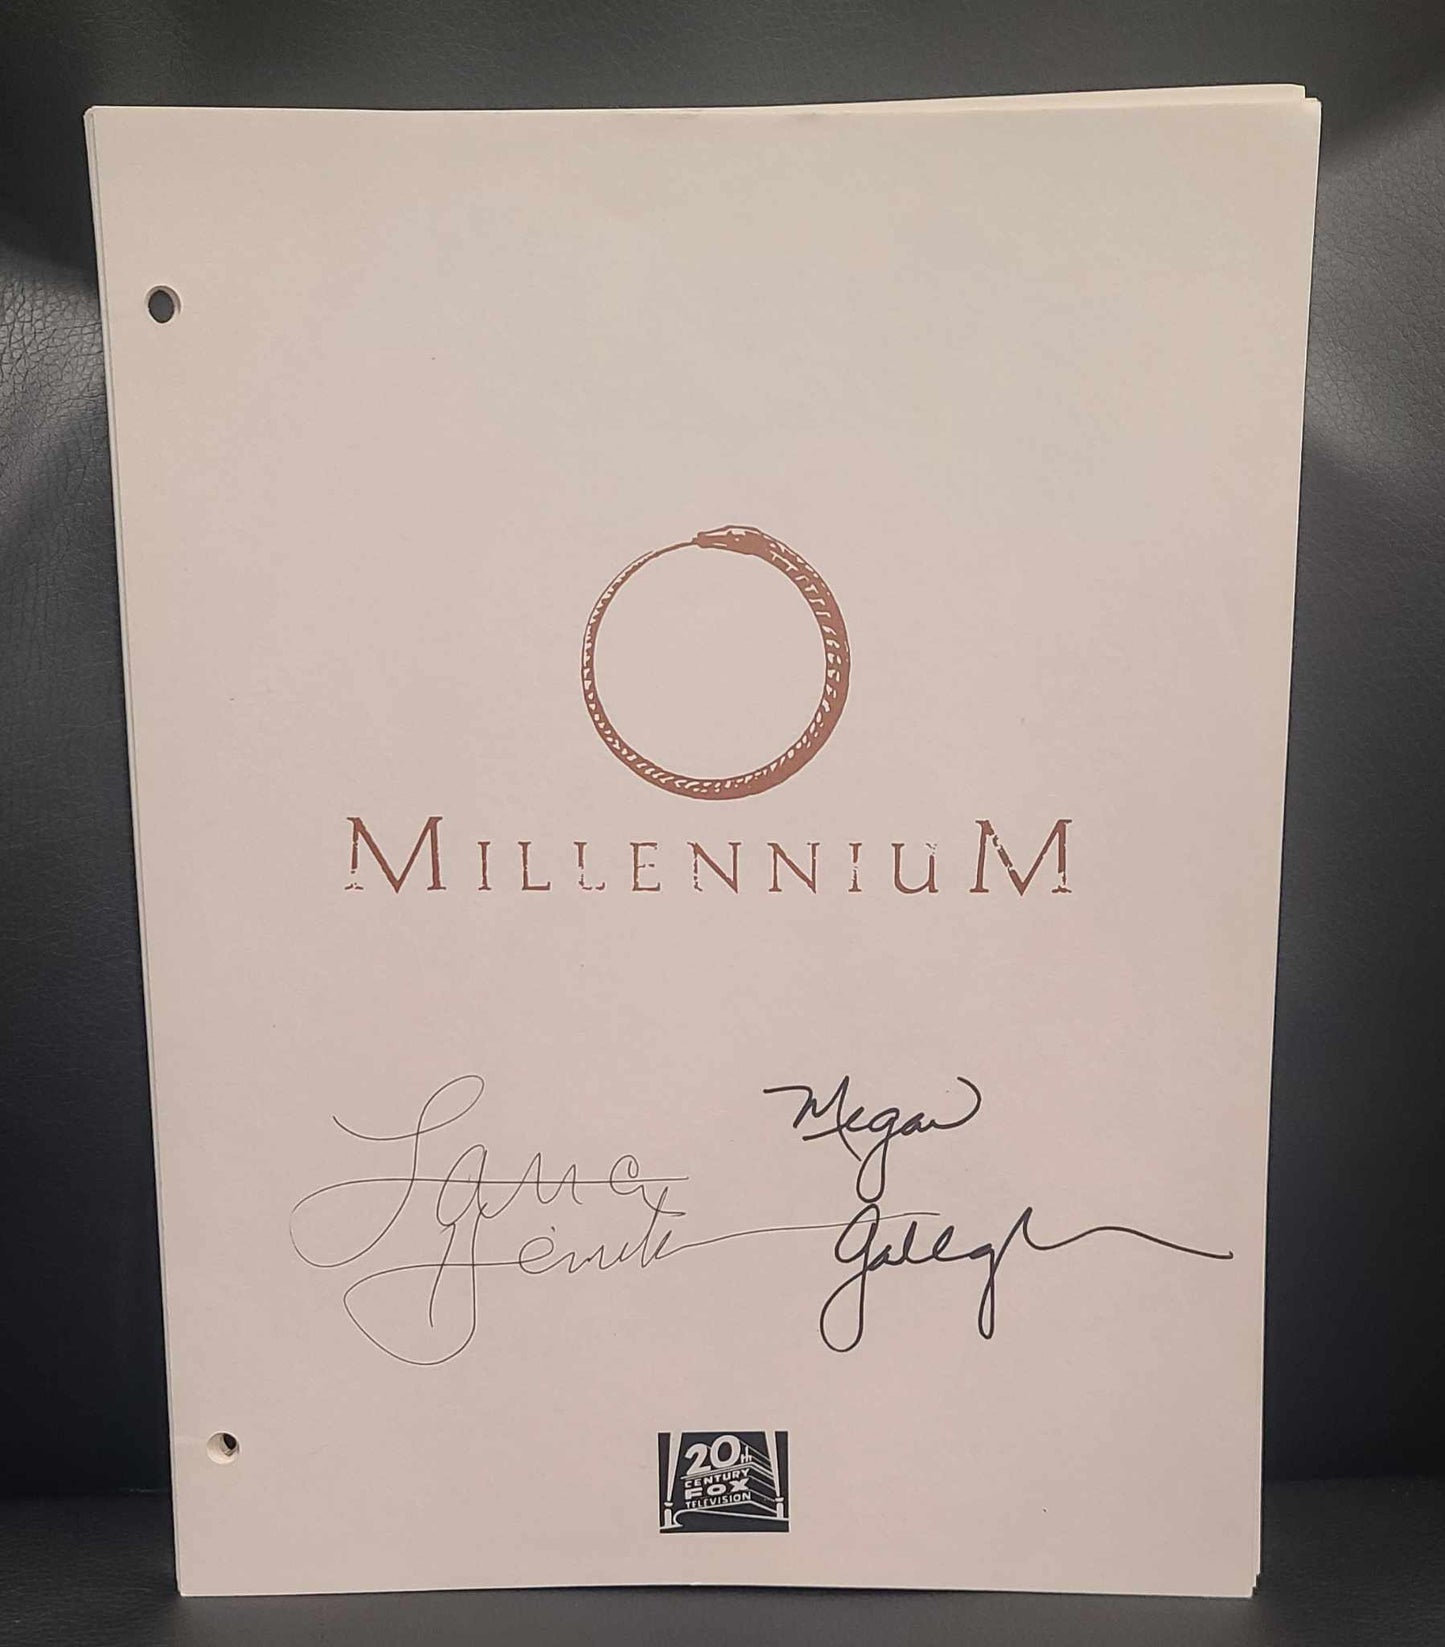 Millennium Script cover autographed by Lance Hendrickson and Megan Gallagher